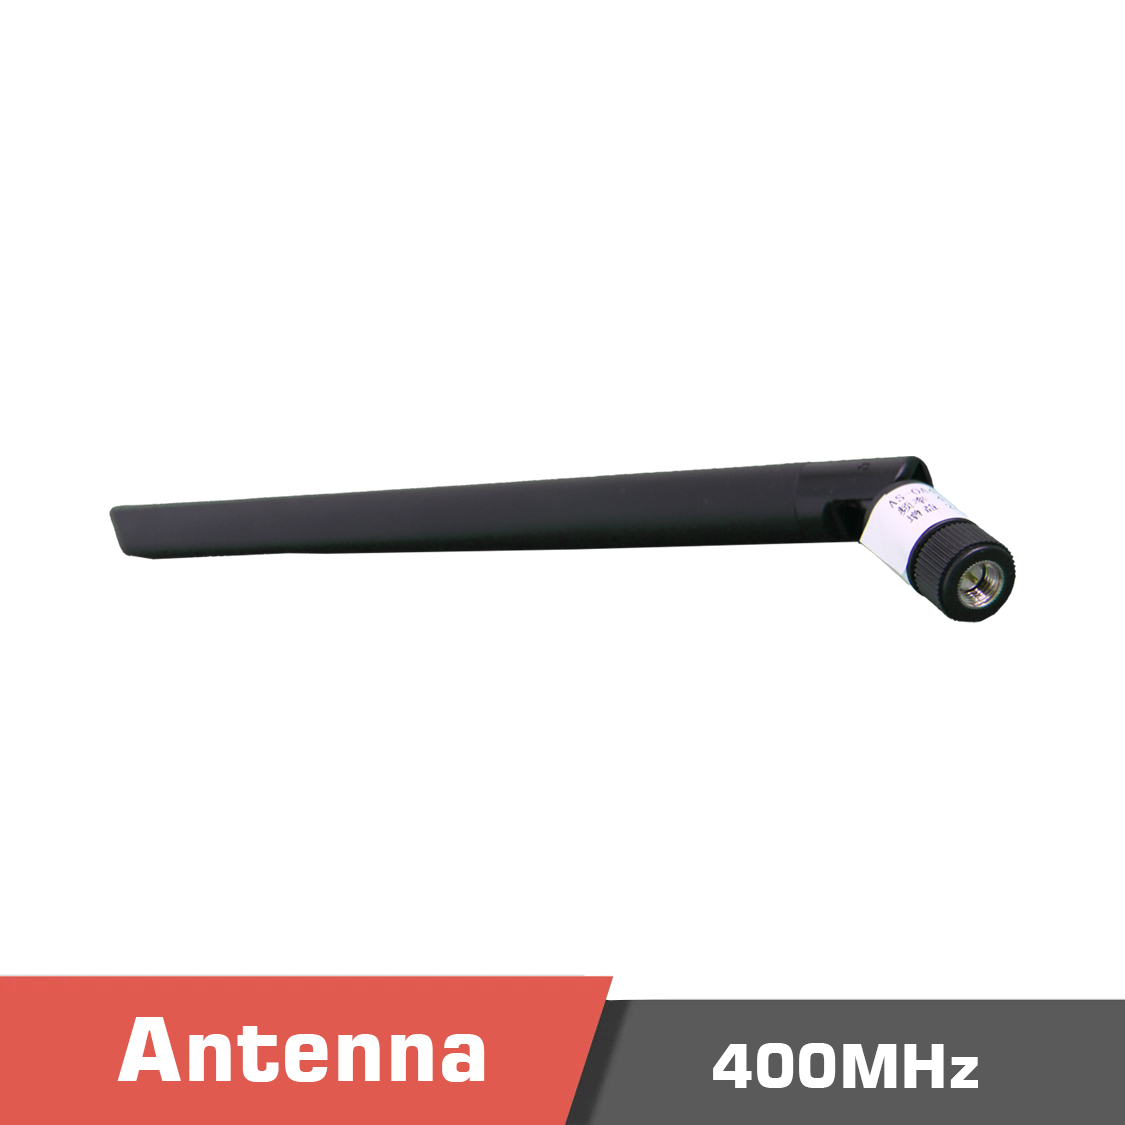 Dipole400 3 - digi a09-hasm-7,omnidirectional antenna,wireless lan,scada,lpwan/iot/m2m,wireless video links,900mhz,900mhz cellular band applications,ism band,long-range data link,long-range antenna,long-range video link,telemetry,unmanned aerial vehicle,panel antenna,automatic antenna tracker,aat,2. 1dbi omnidirectional antenna - motionew - 1